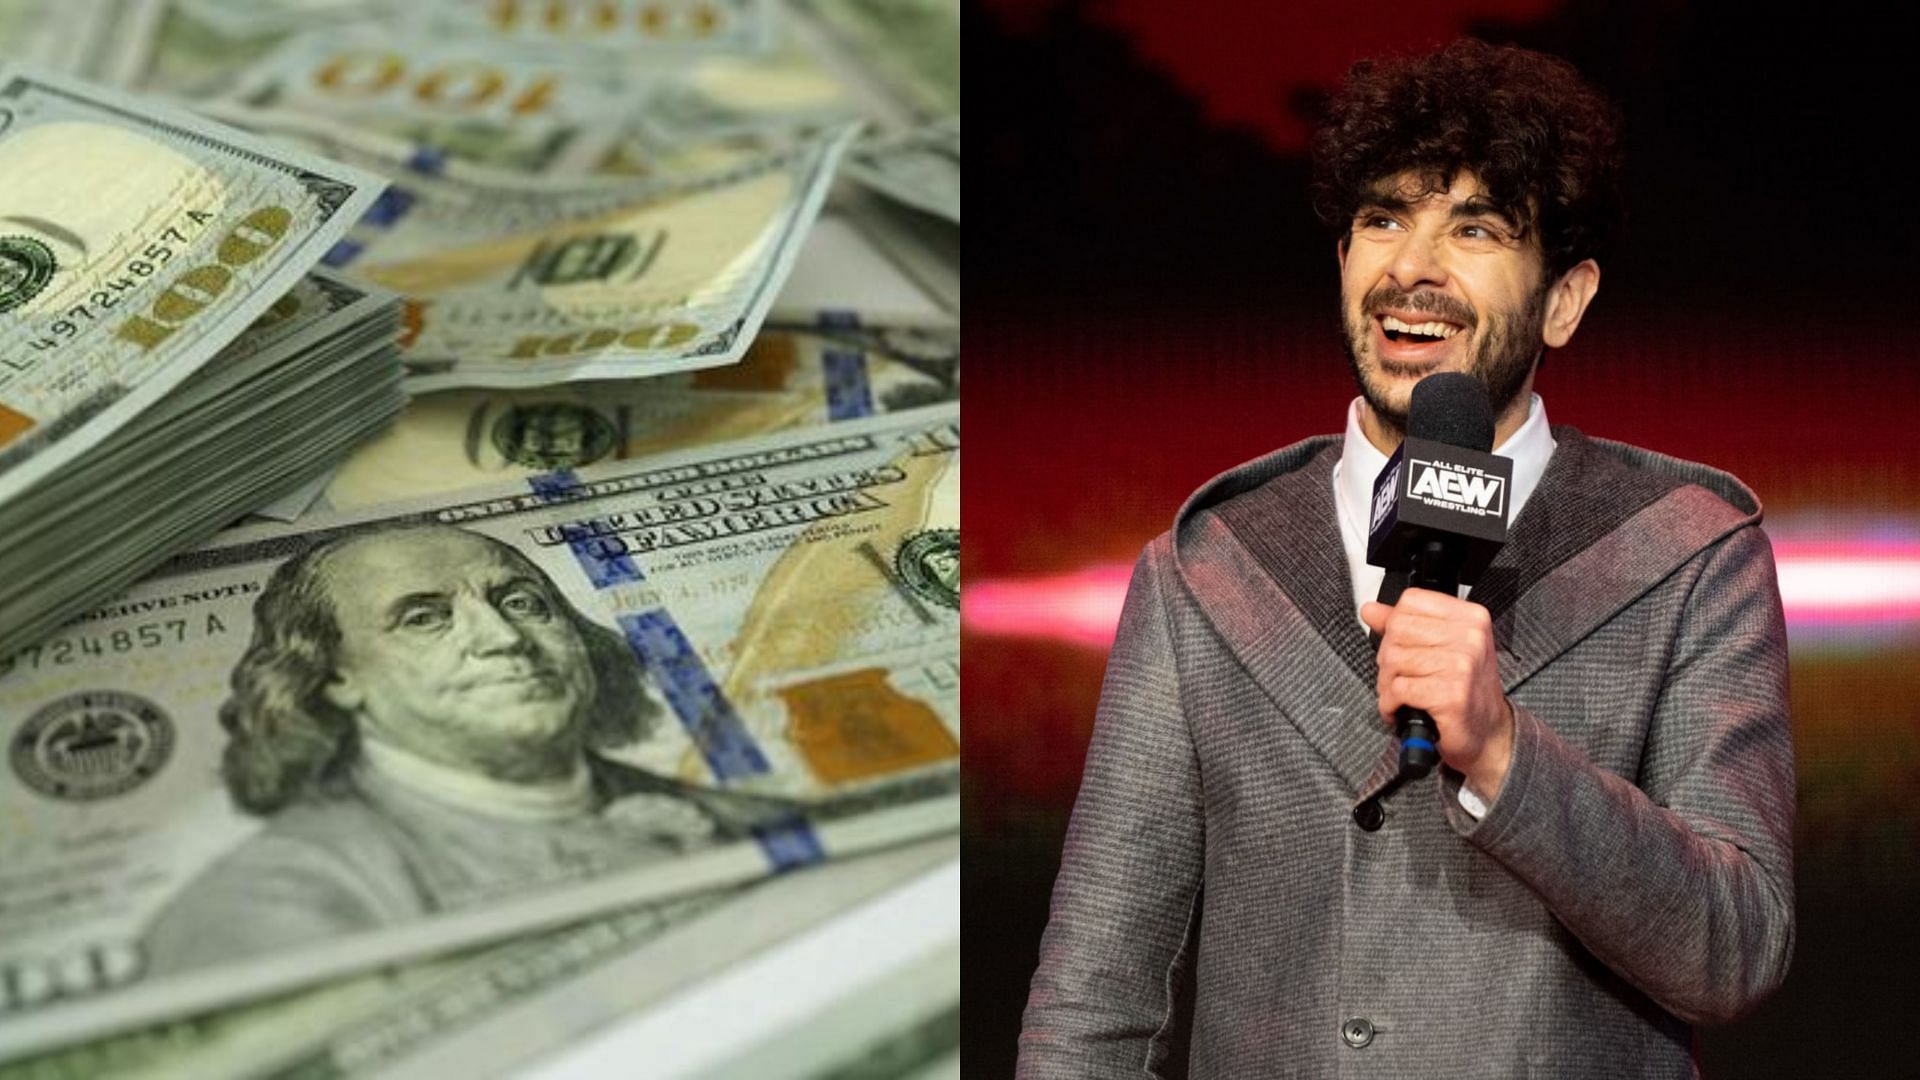 Could Tony Khan sign Carlito to AEW?